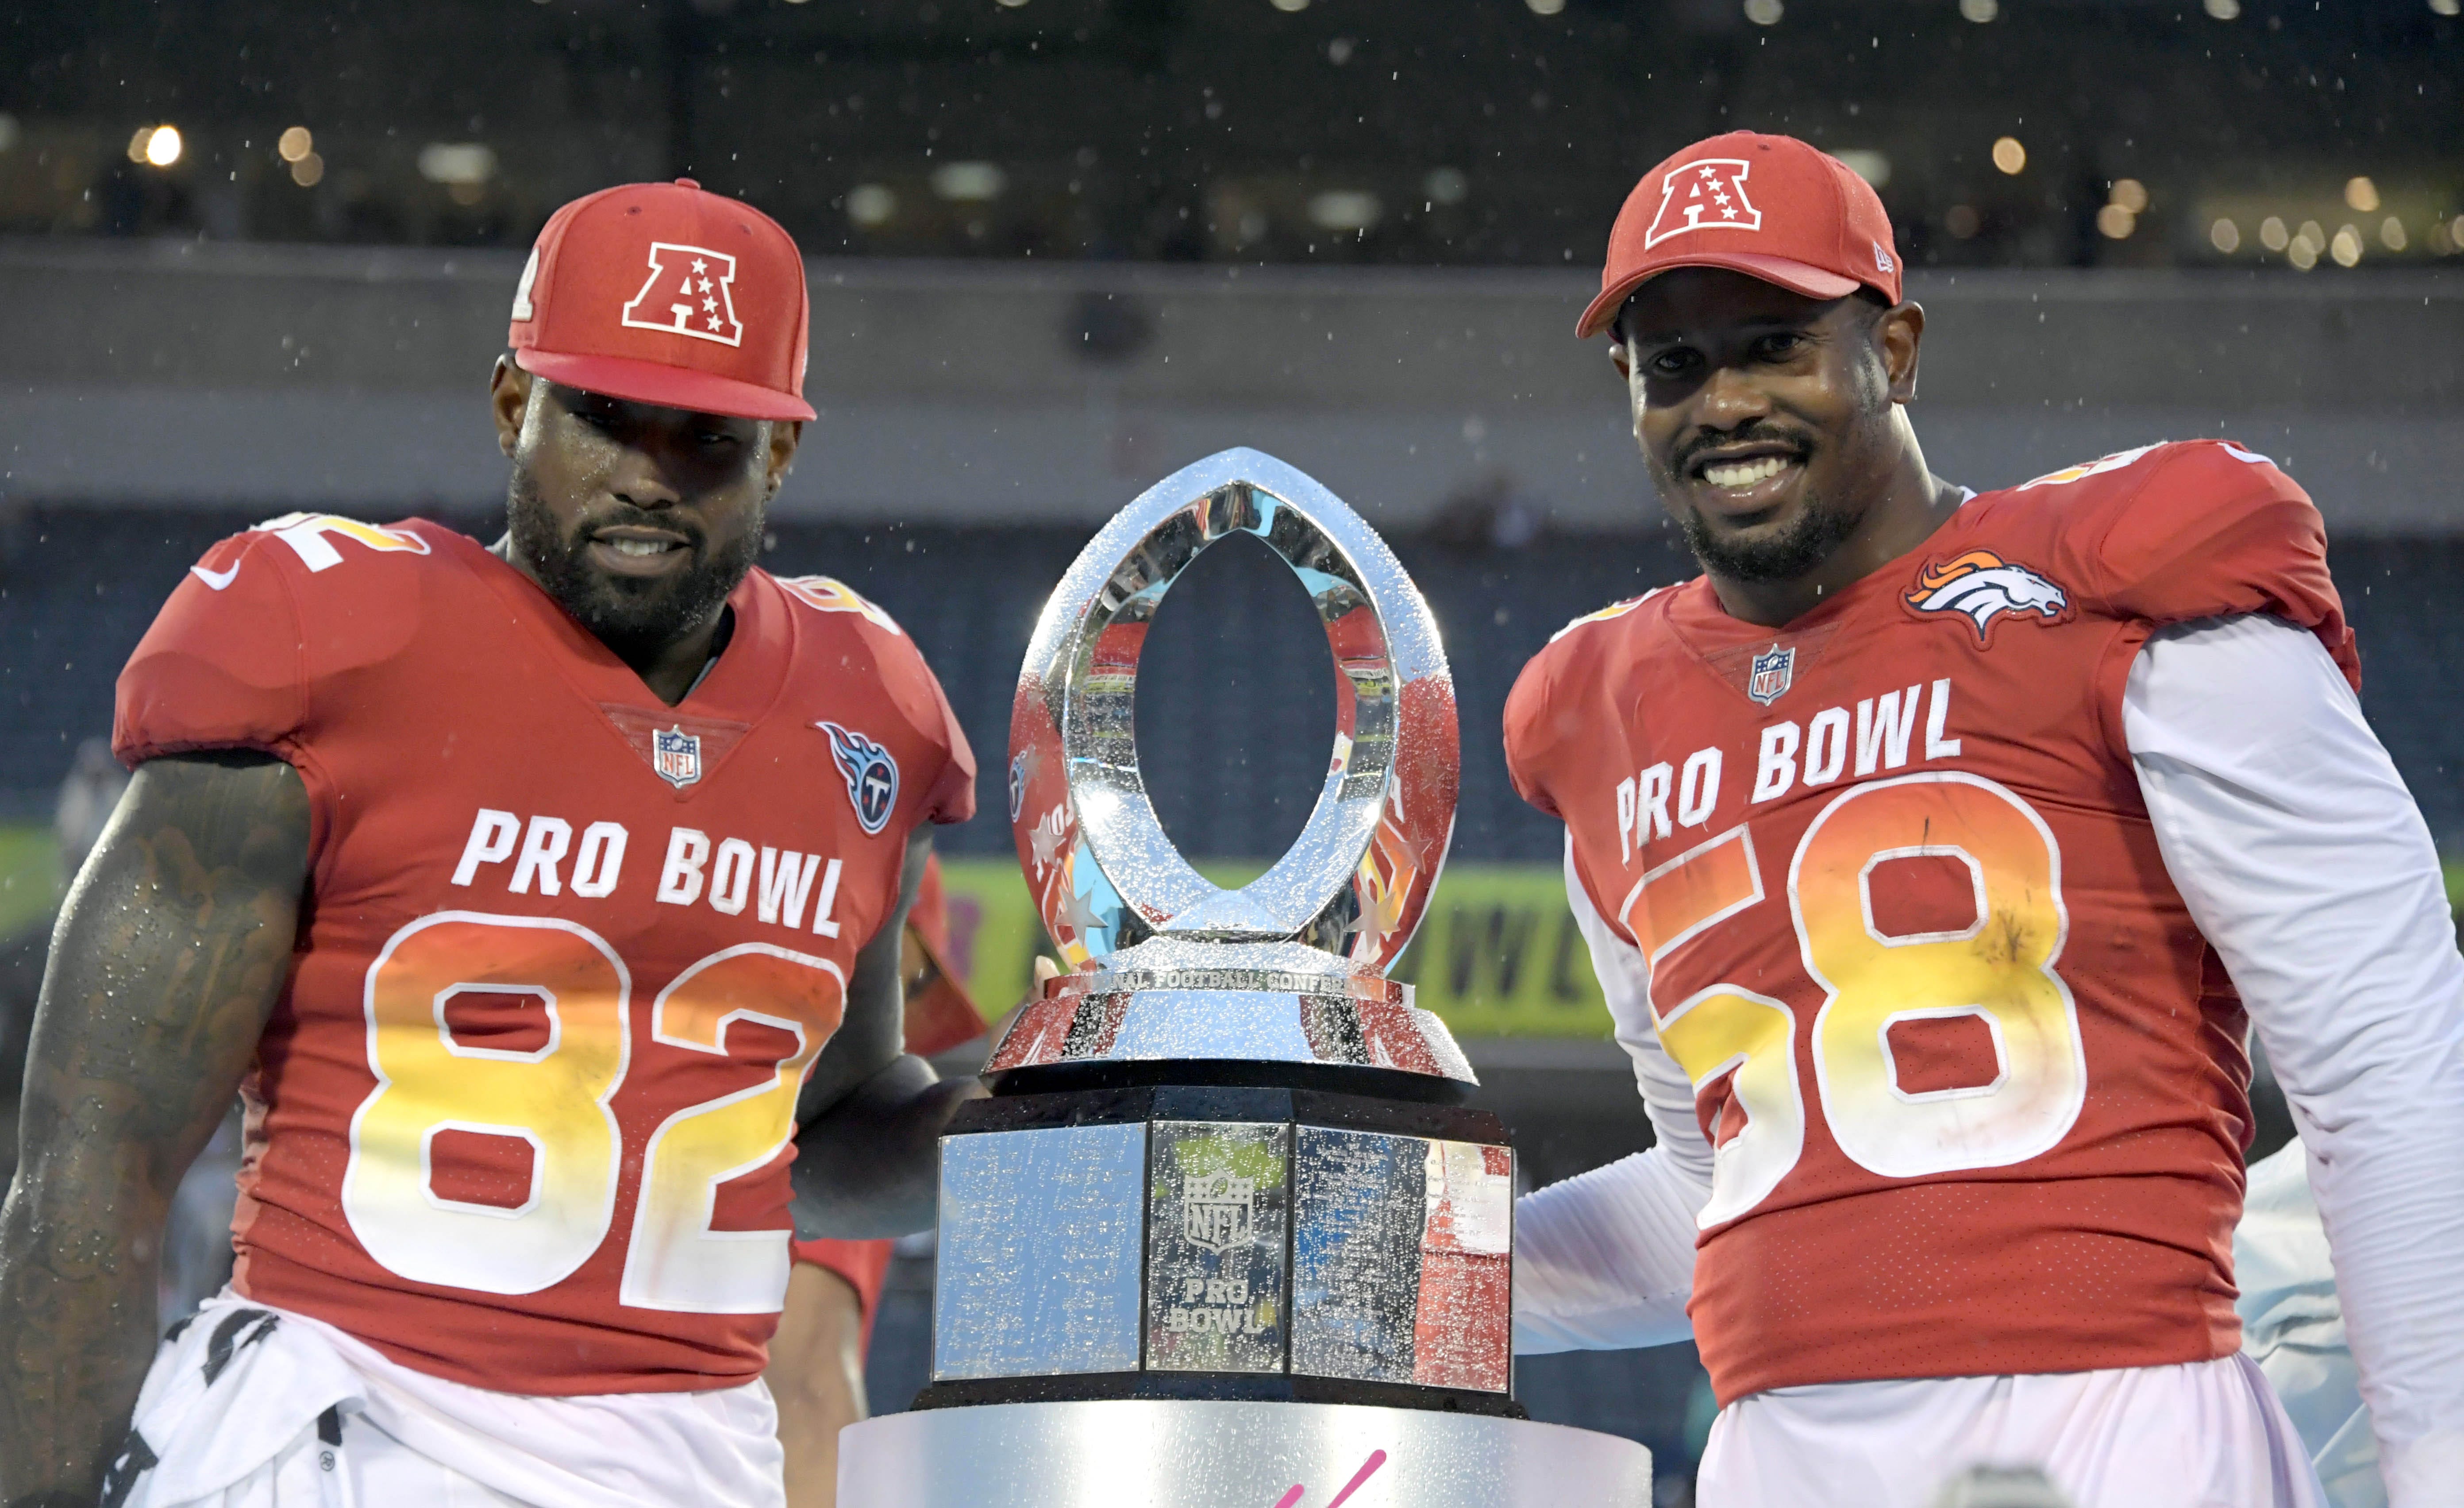 AFC rallies from 17 points down to top NFC in Pro Bowl